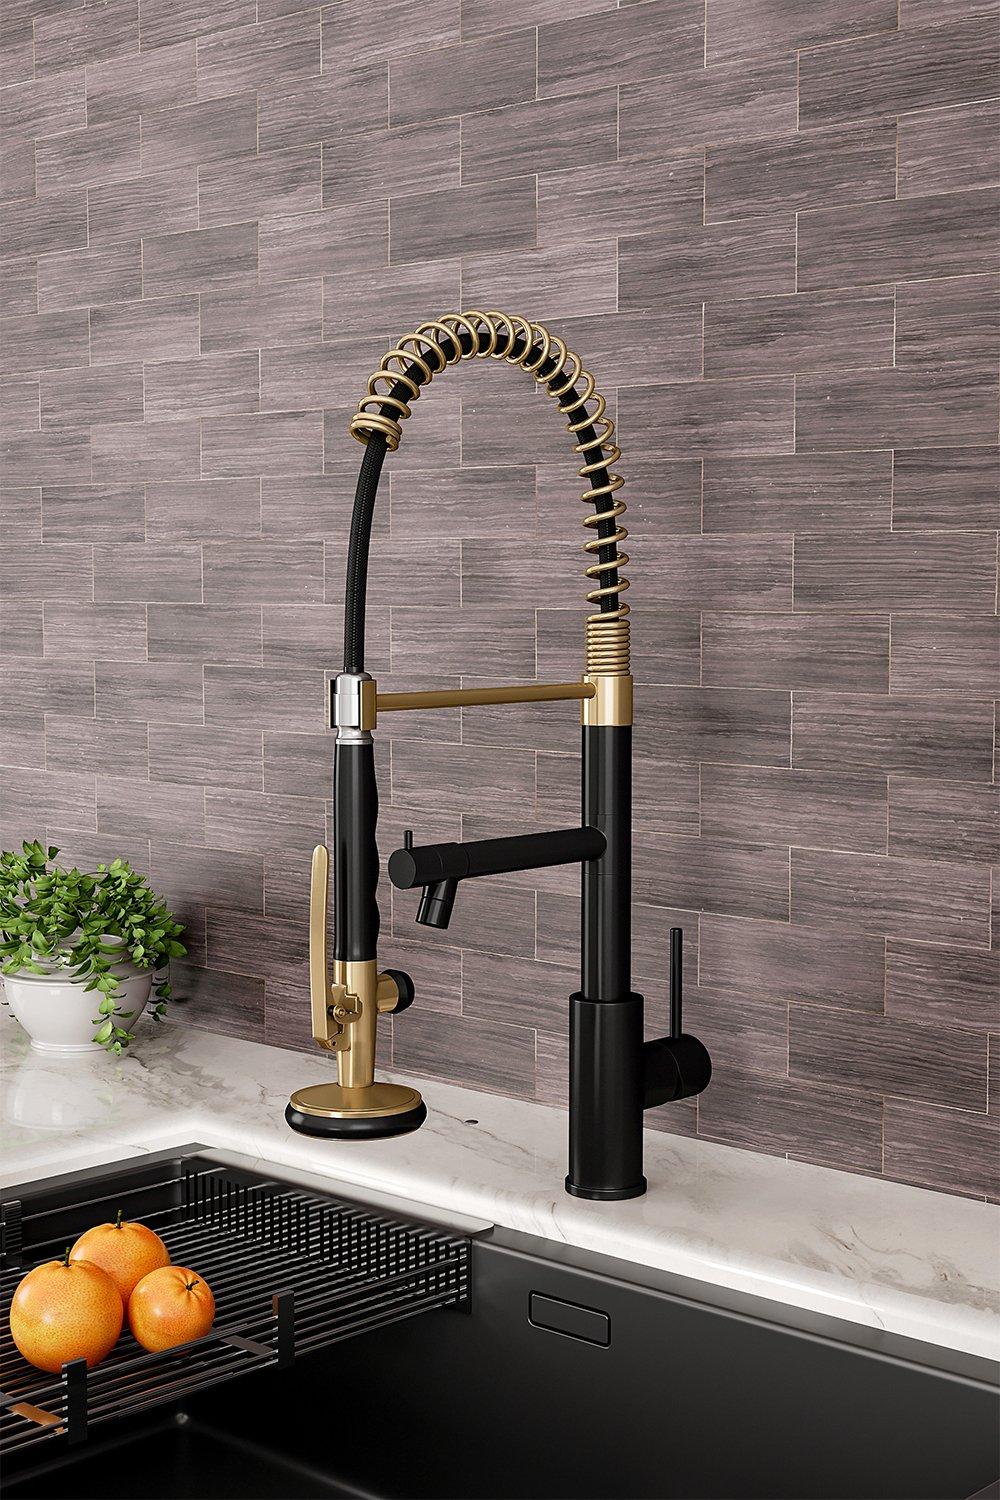 Swivel Bathroom Faucet with Pull Down Sprayer and Pot Filler